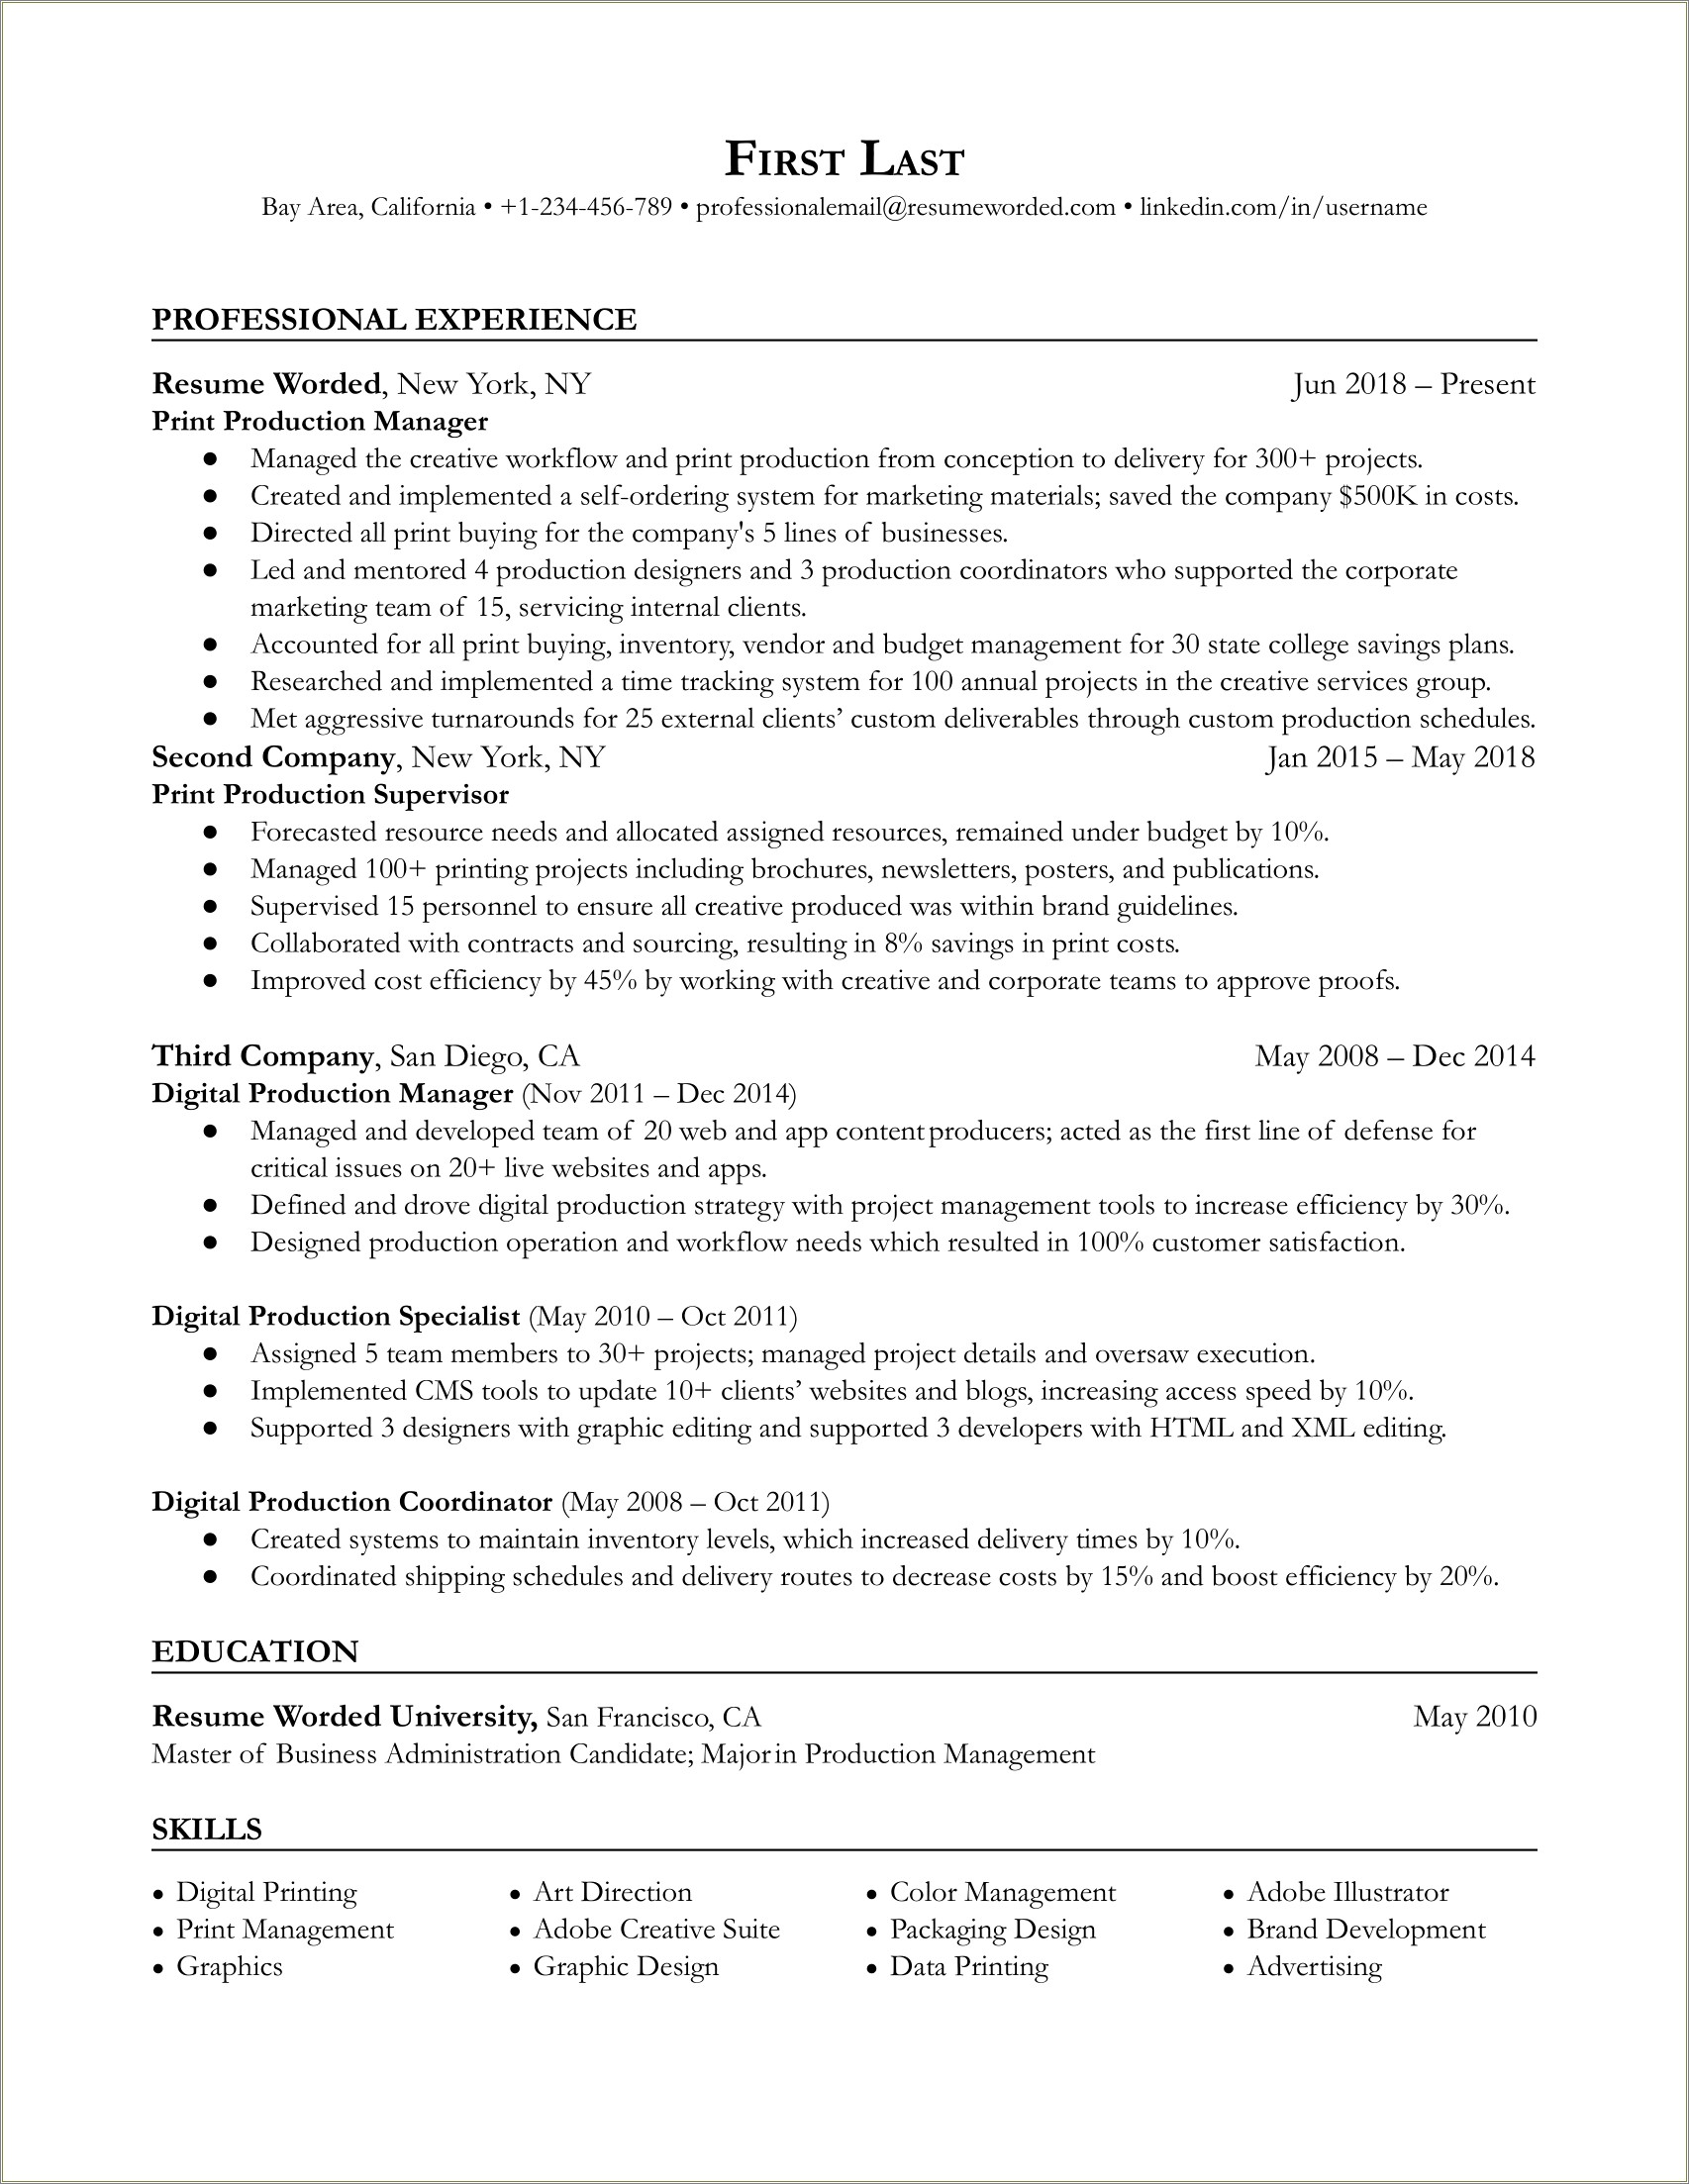 Print Production Manager Resume Samples